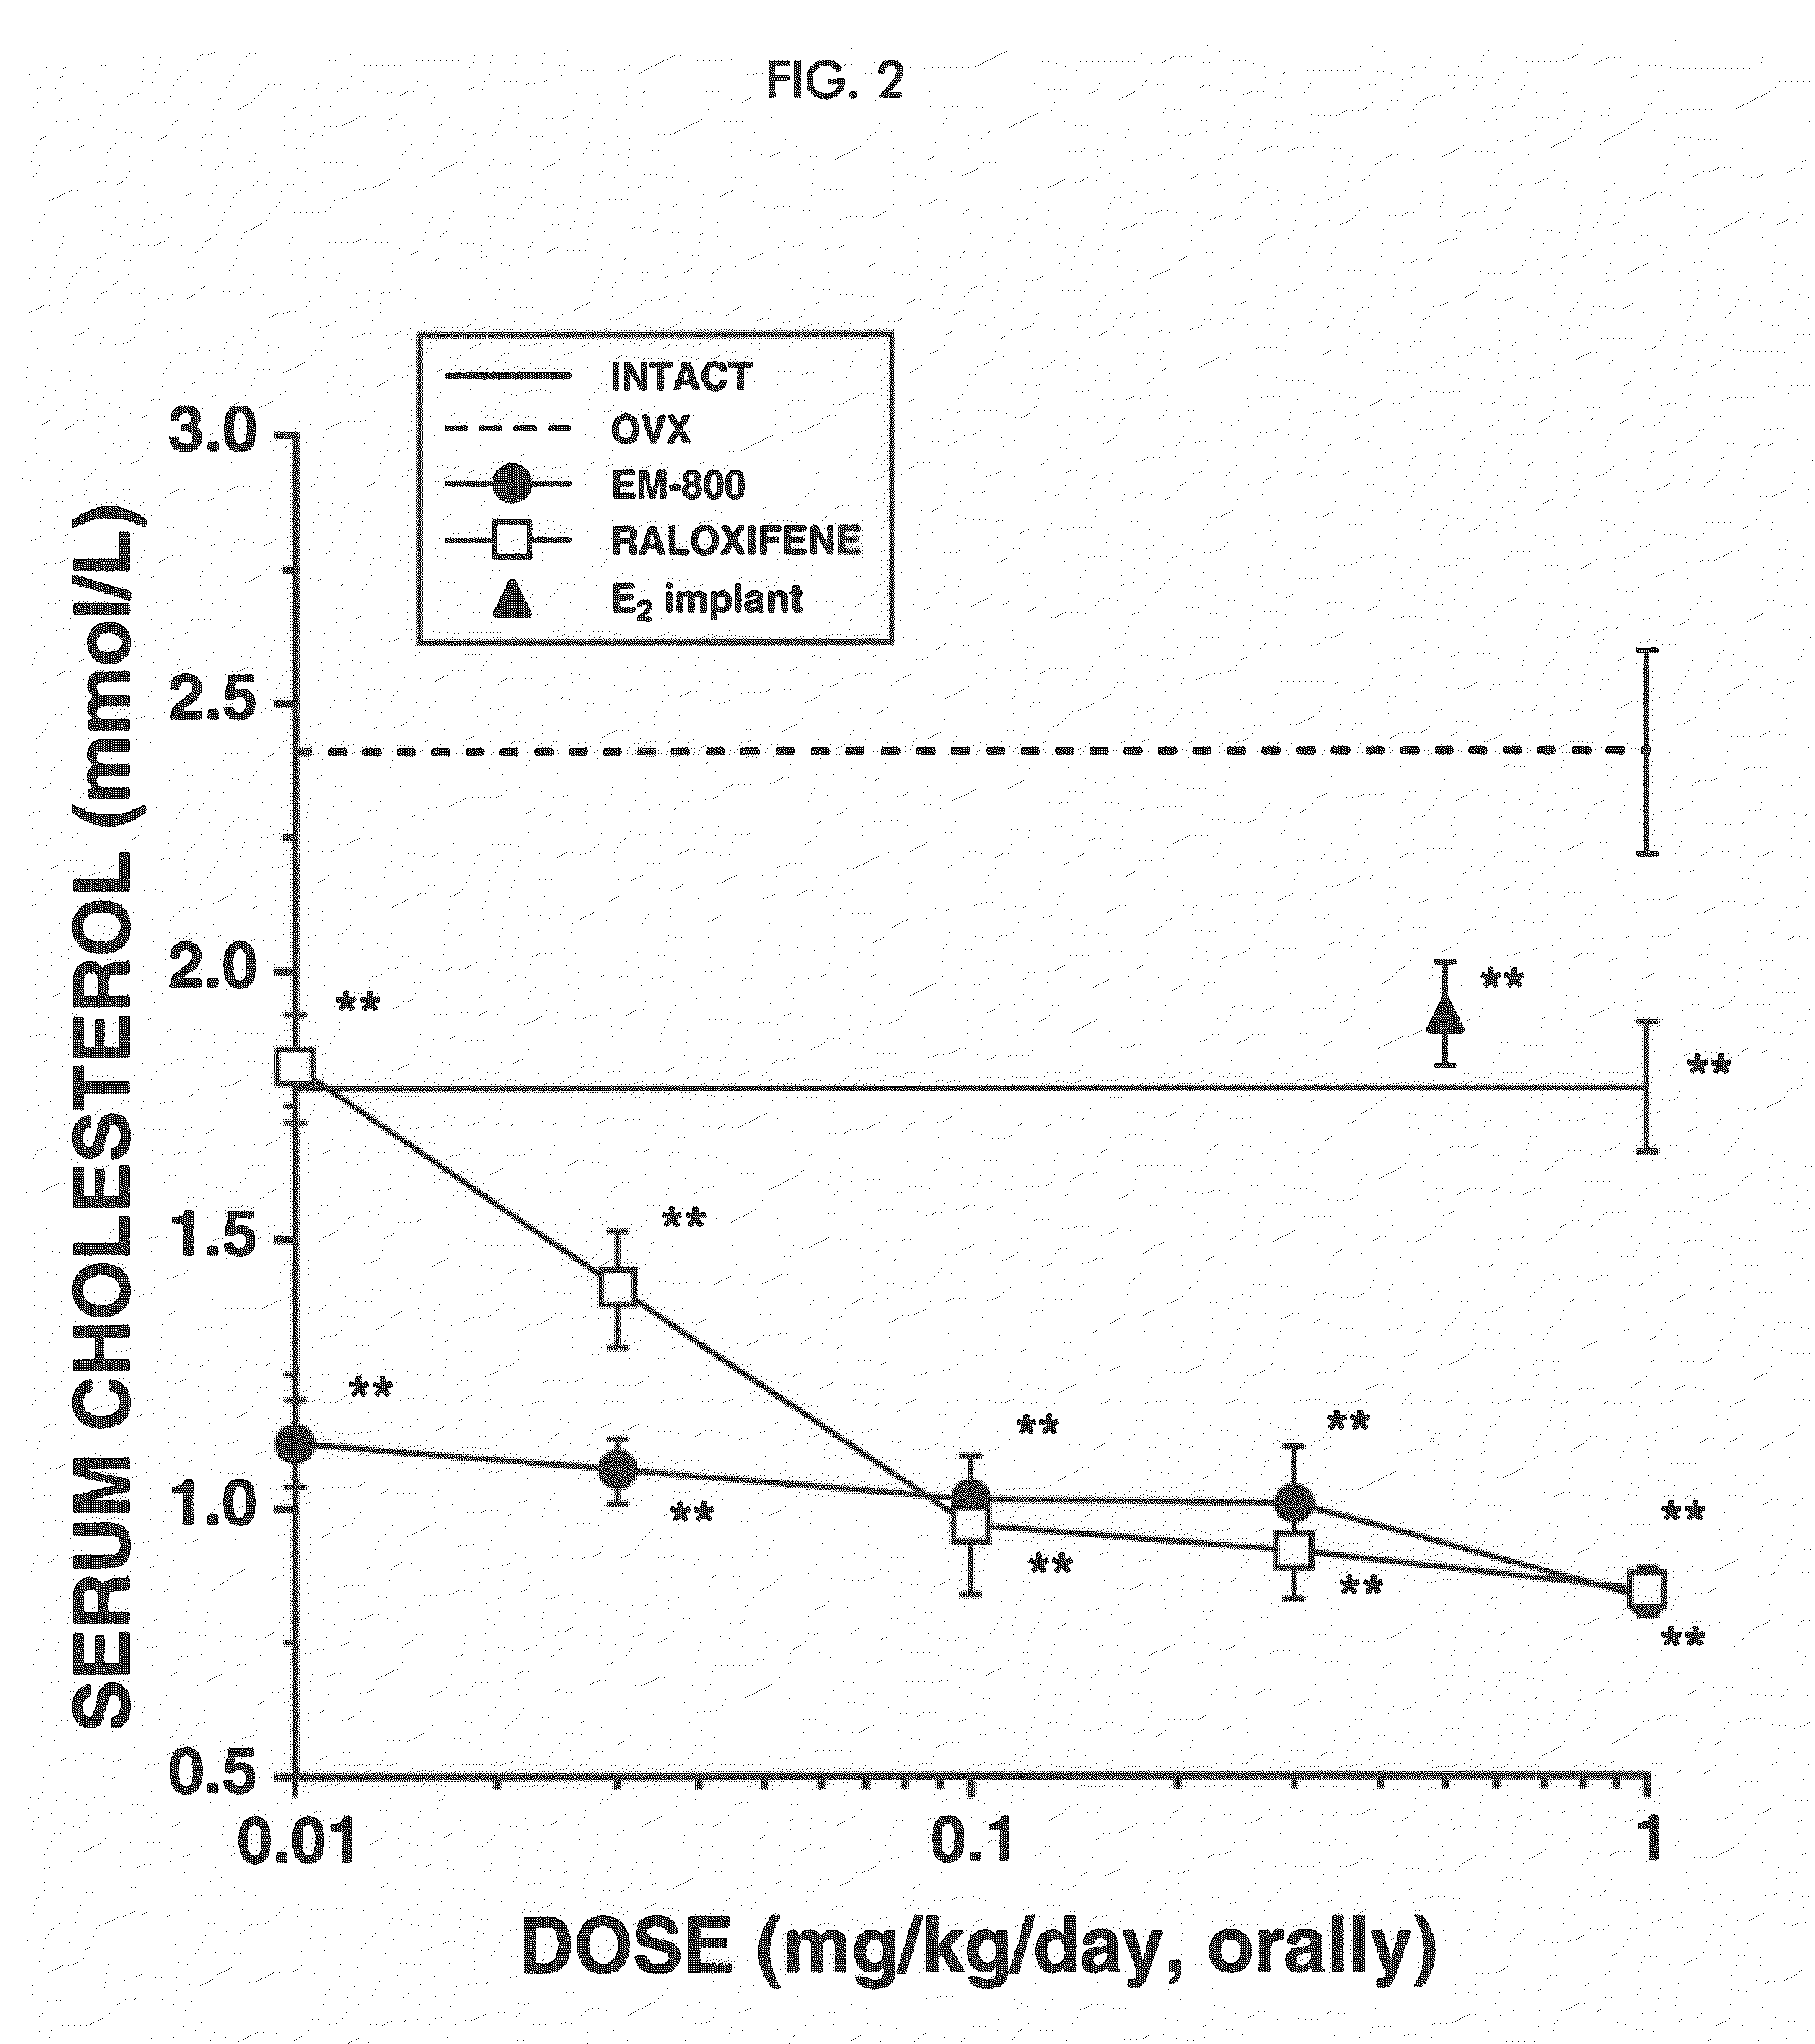 Treatment of hot flushes, vasomotor symptoms, and night sweats with sex steroid precursors in combination with selective estrogen receptor modulators